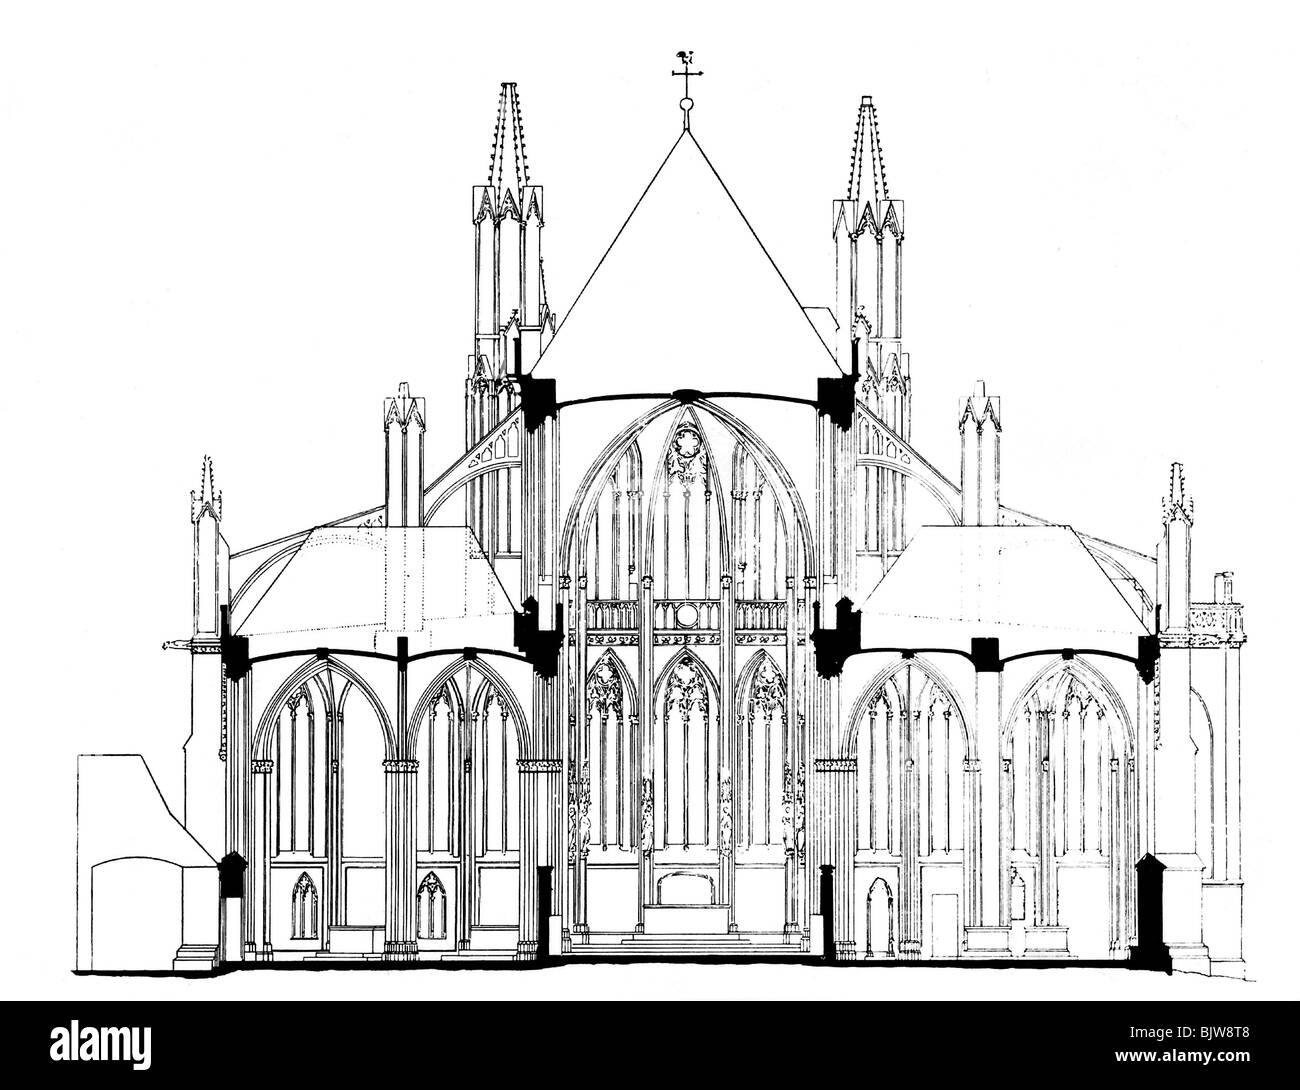 architecture, ground plan, cross section of a gothic cathedral, drawing, historic, historical, floor plans, nave, central aisle, vertical section, sacred building, sacred buildings, Stock Photo